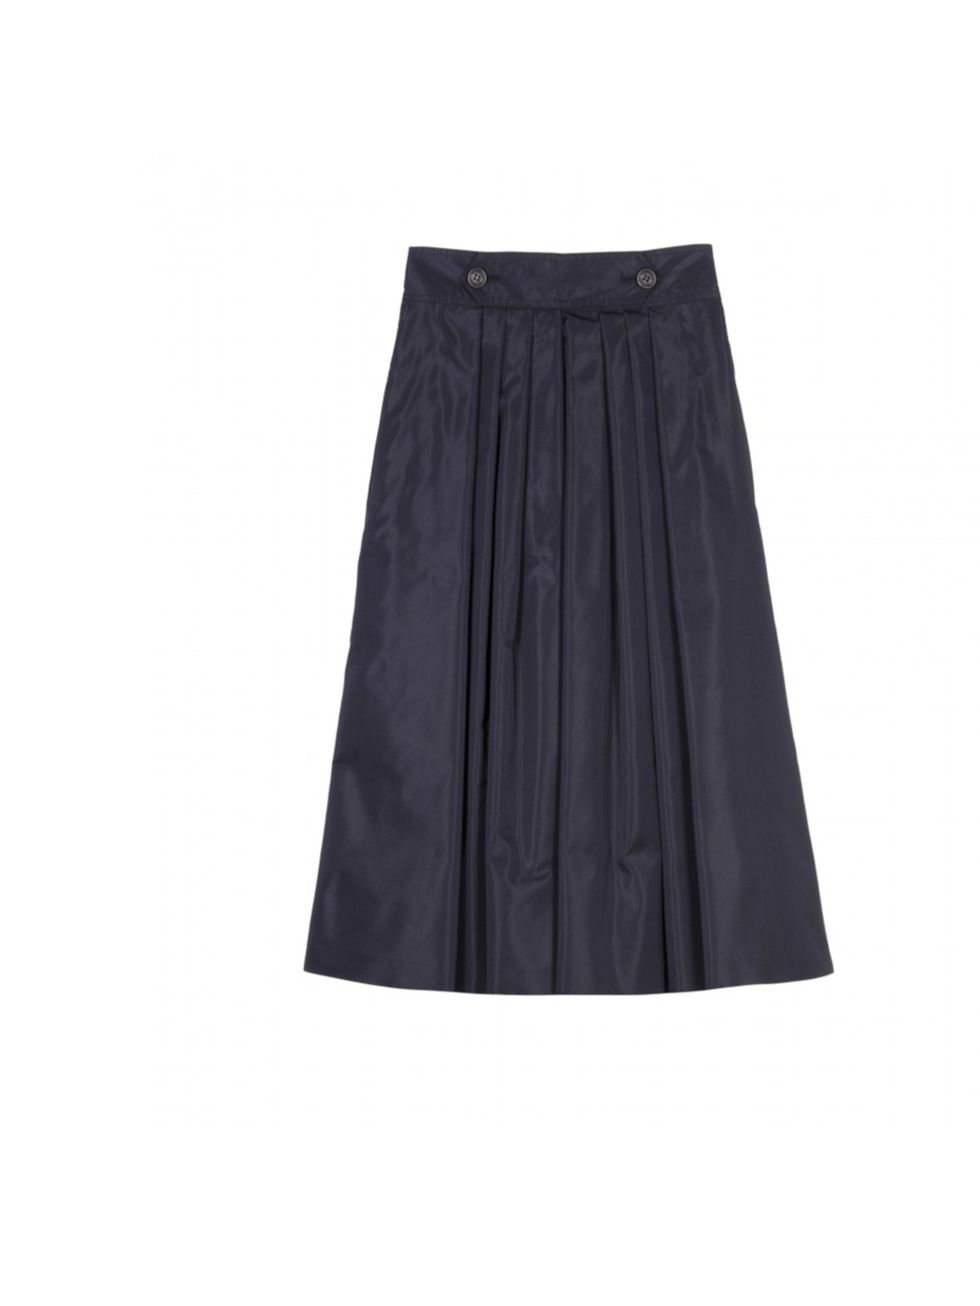 <p>Burberry Prorsum pleated full skirt, £595, at Mytheresa</p><p><a href="http://shopping.elleuk.com/browse?fts=burberry+full+skirt">BUY NOW</a></p>